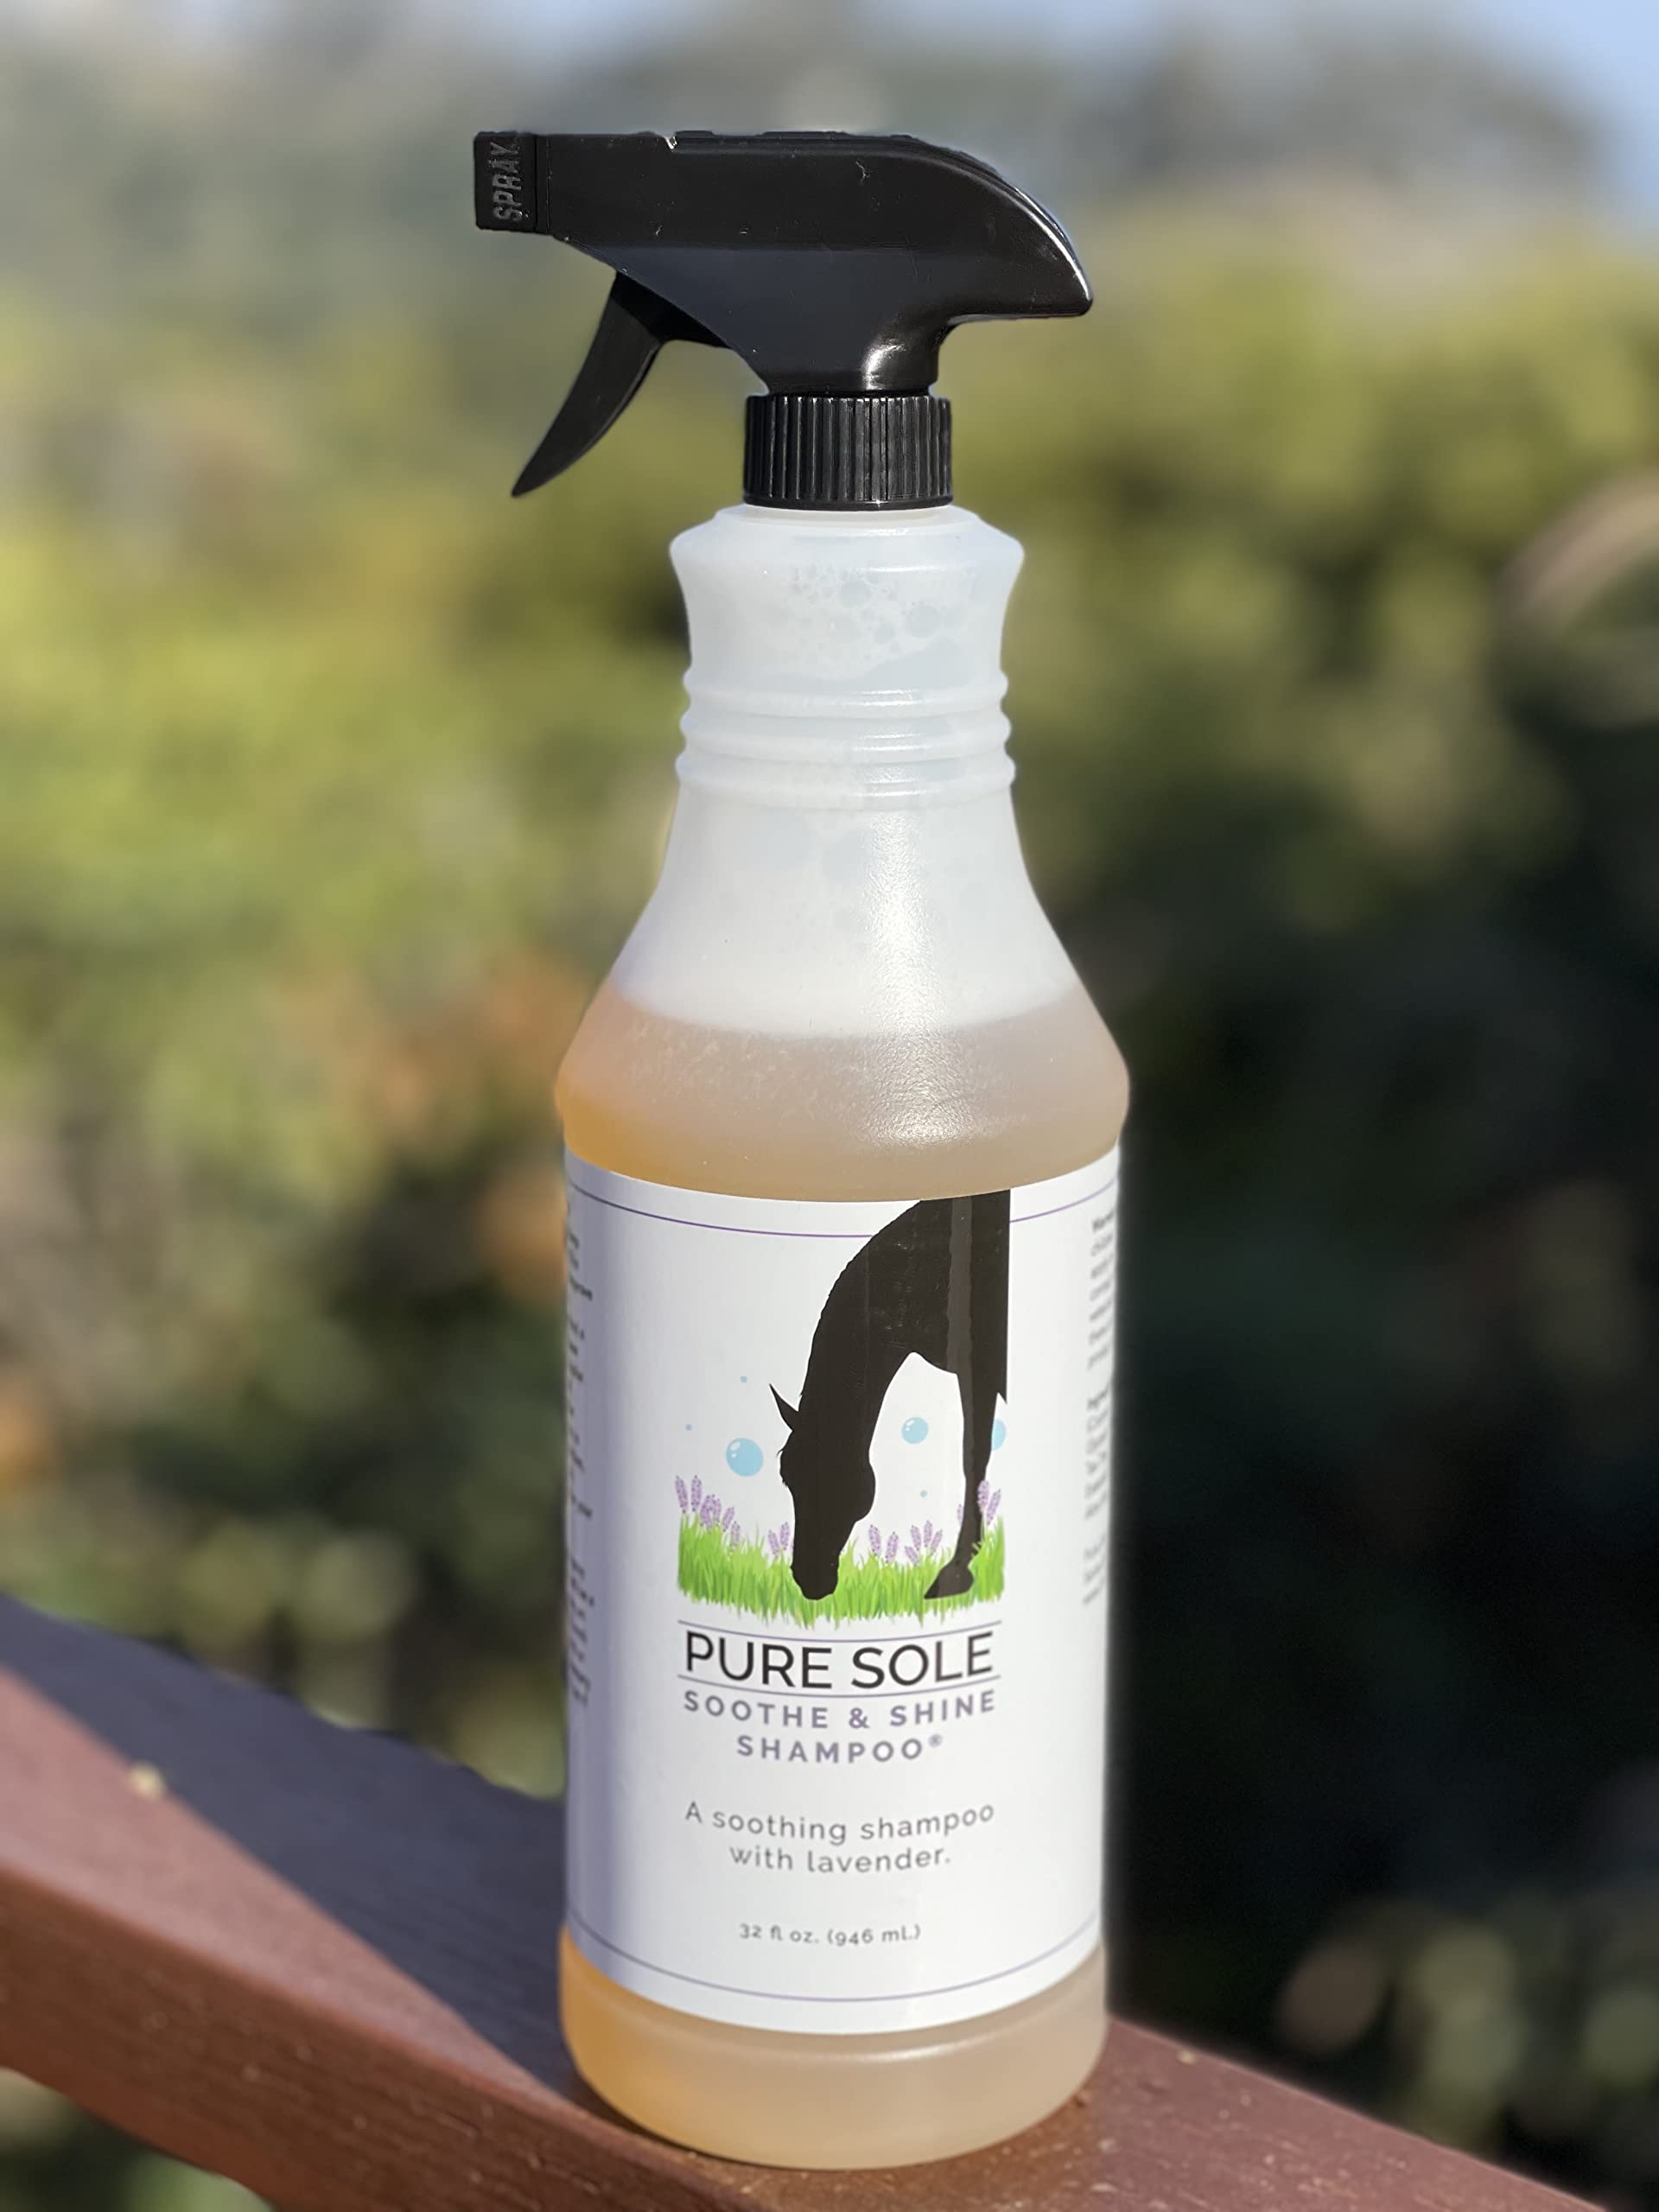 Pure Sole Soothe & Shine Shampoo - A Gentle Deep Cleaning Moisturizing Horse Shampoo - Hydrates Skin and Conditions Coat. - Perfect for Mane and Tail Too - 32 oz.